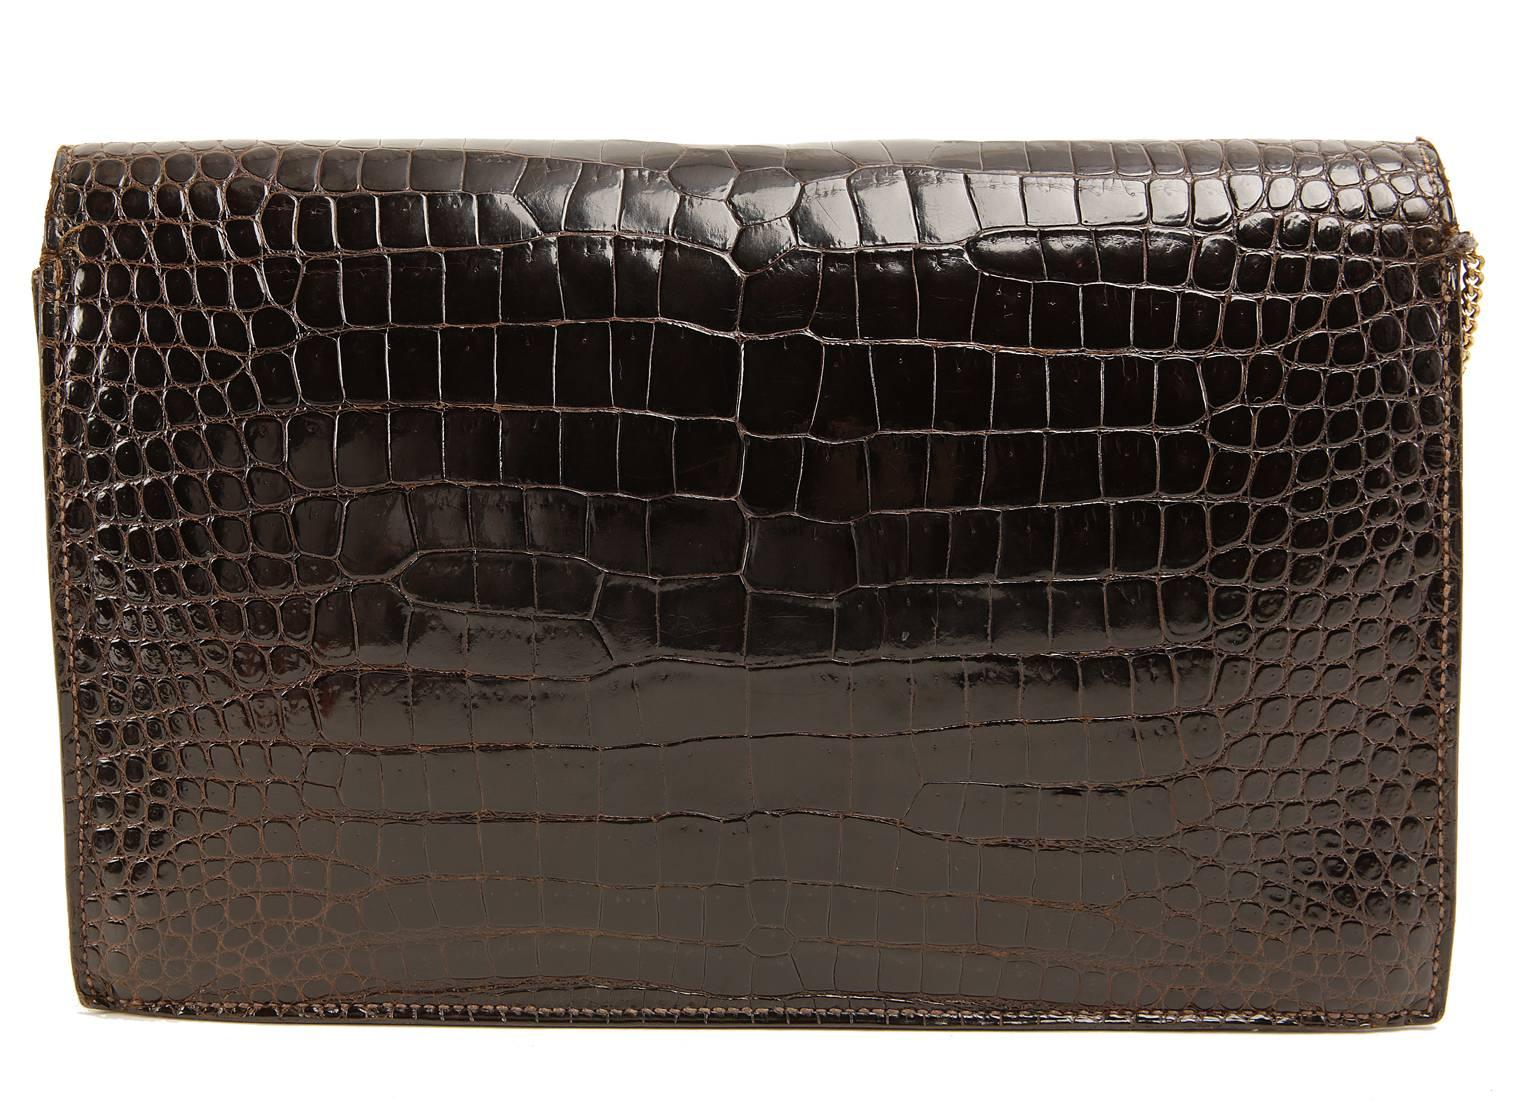 Hermès Brown Porosus Crocodile Lydie is in beautiful condition. Highly collectible, the Lydie is no longer in production.   It may be carried on the shoulder or as a clutch. 
 
Porosus Crocodile is considered by many to be the premier Hermès